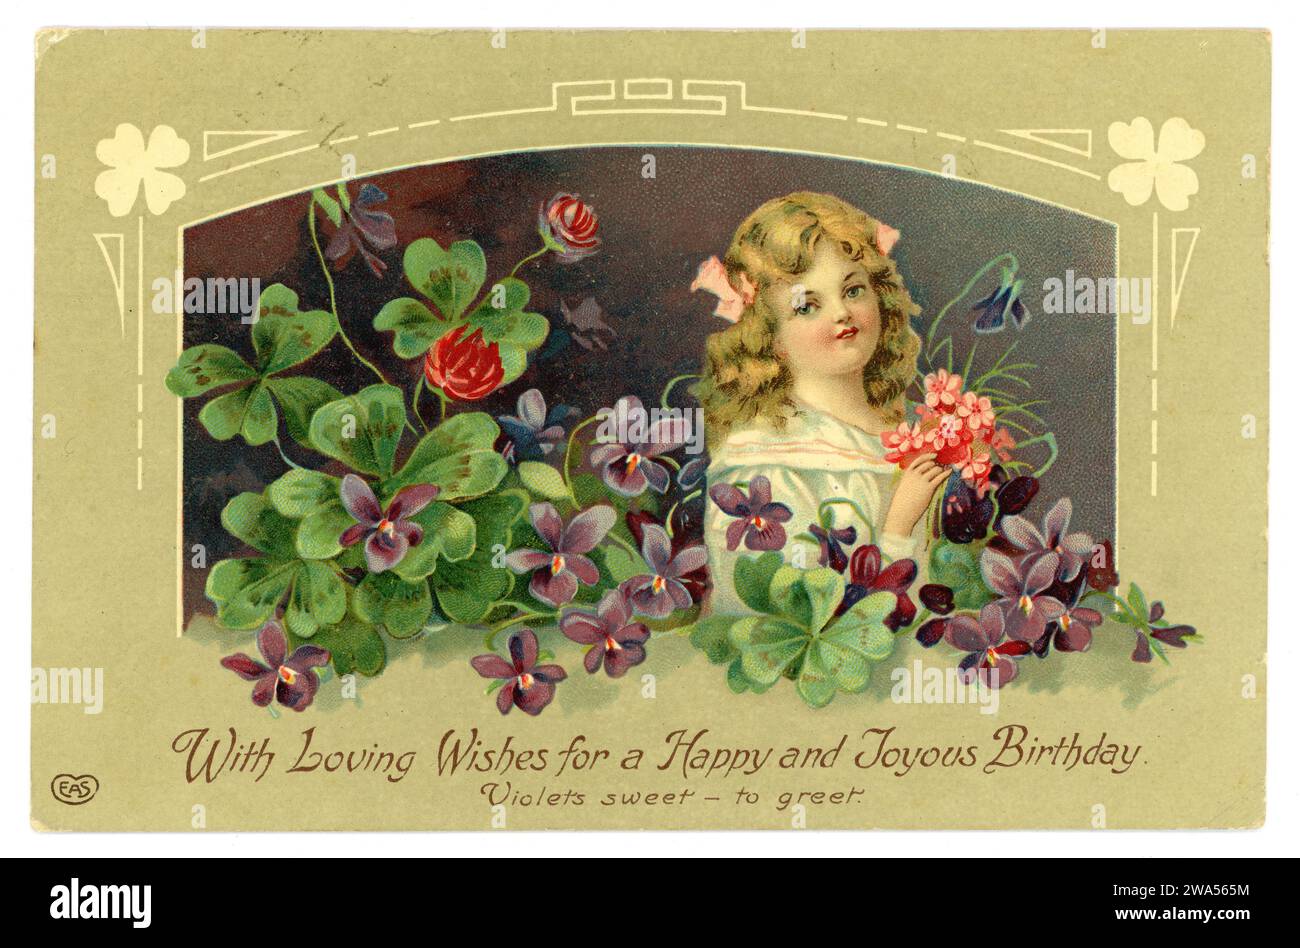 Original Edwardian era birthday greetings card of young girl amongst violets holding bunch of pink flowers, published E.A. Schwerdtfeger Co. London. posted 14 May 1910, Brighton. Stock Photo